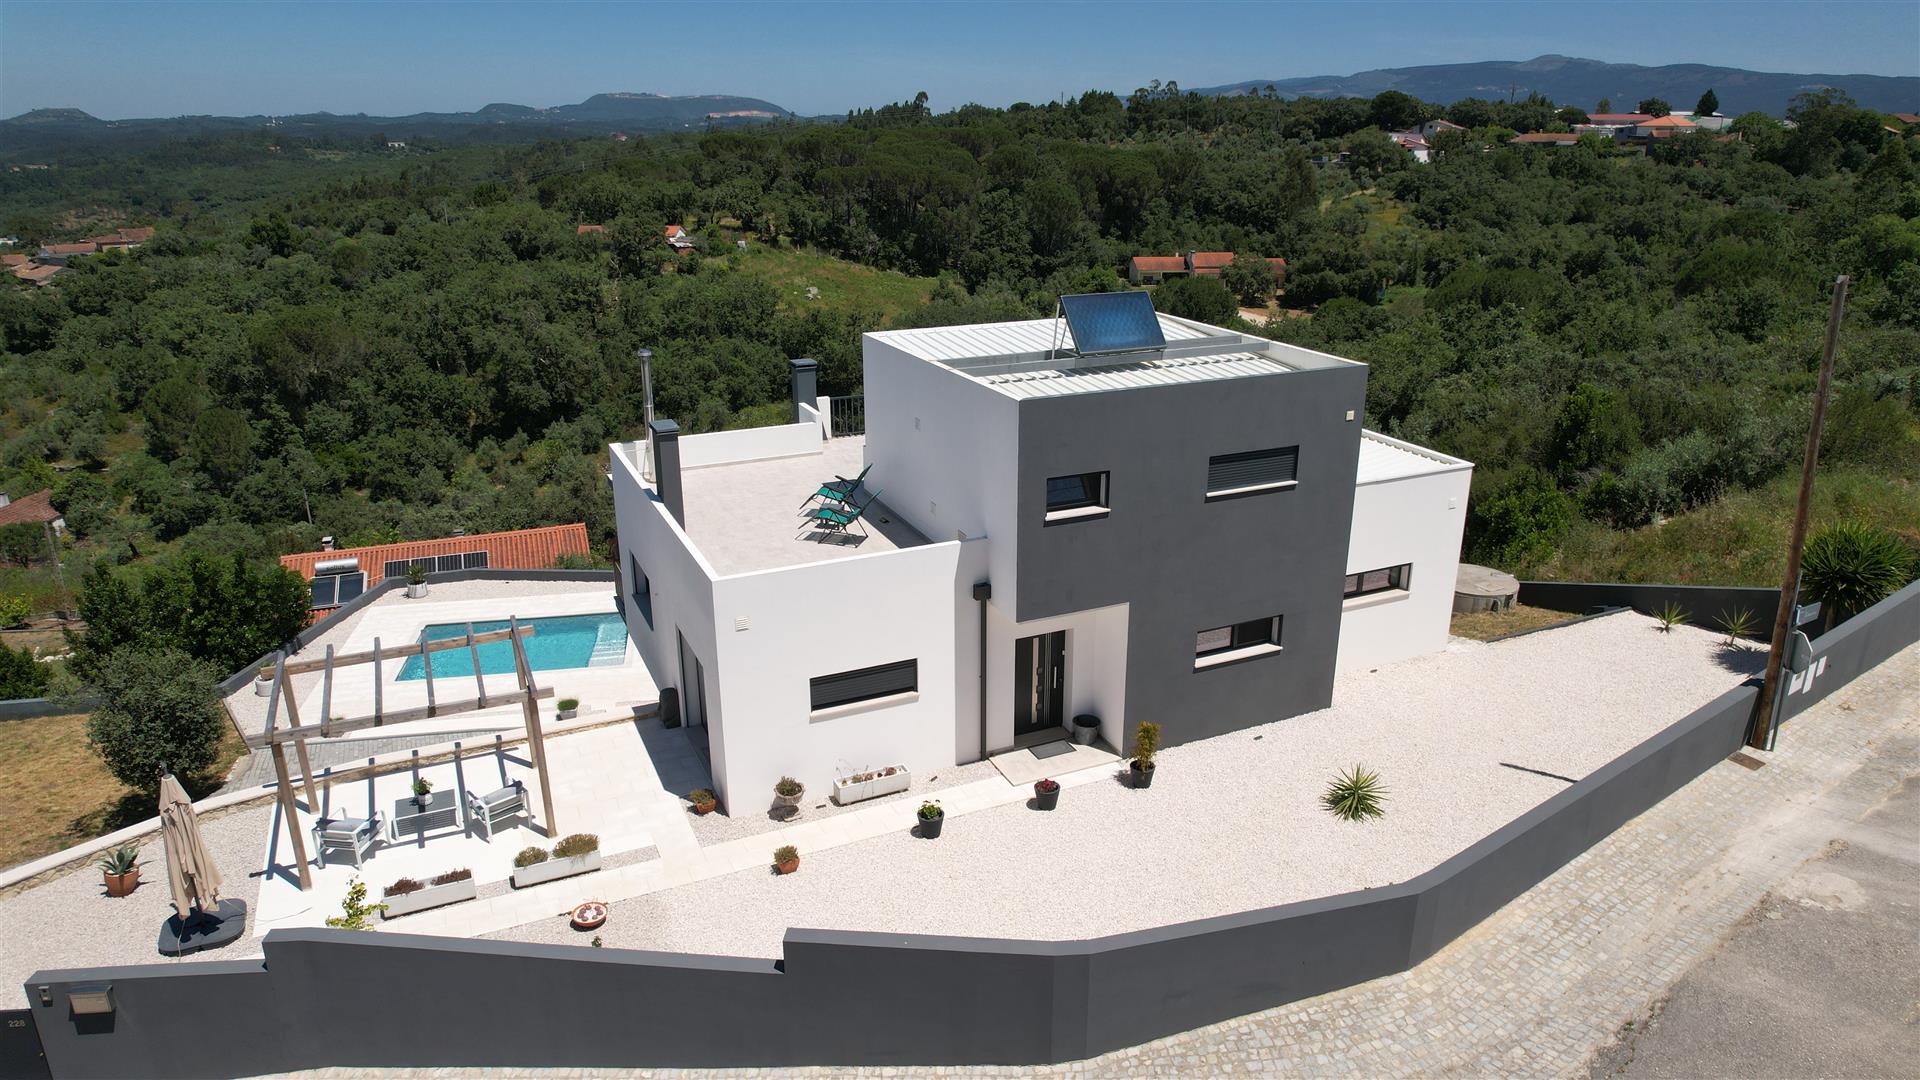 3 Bedroom detached house with pool and spectacular views